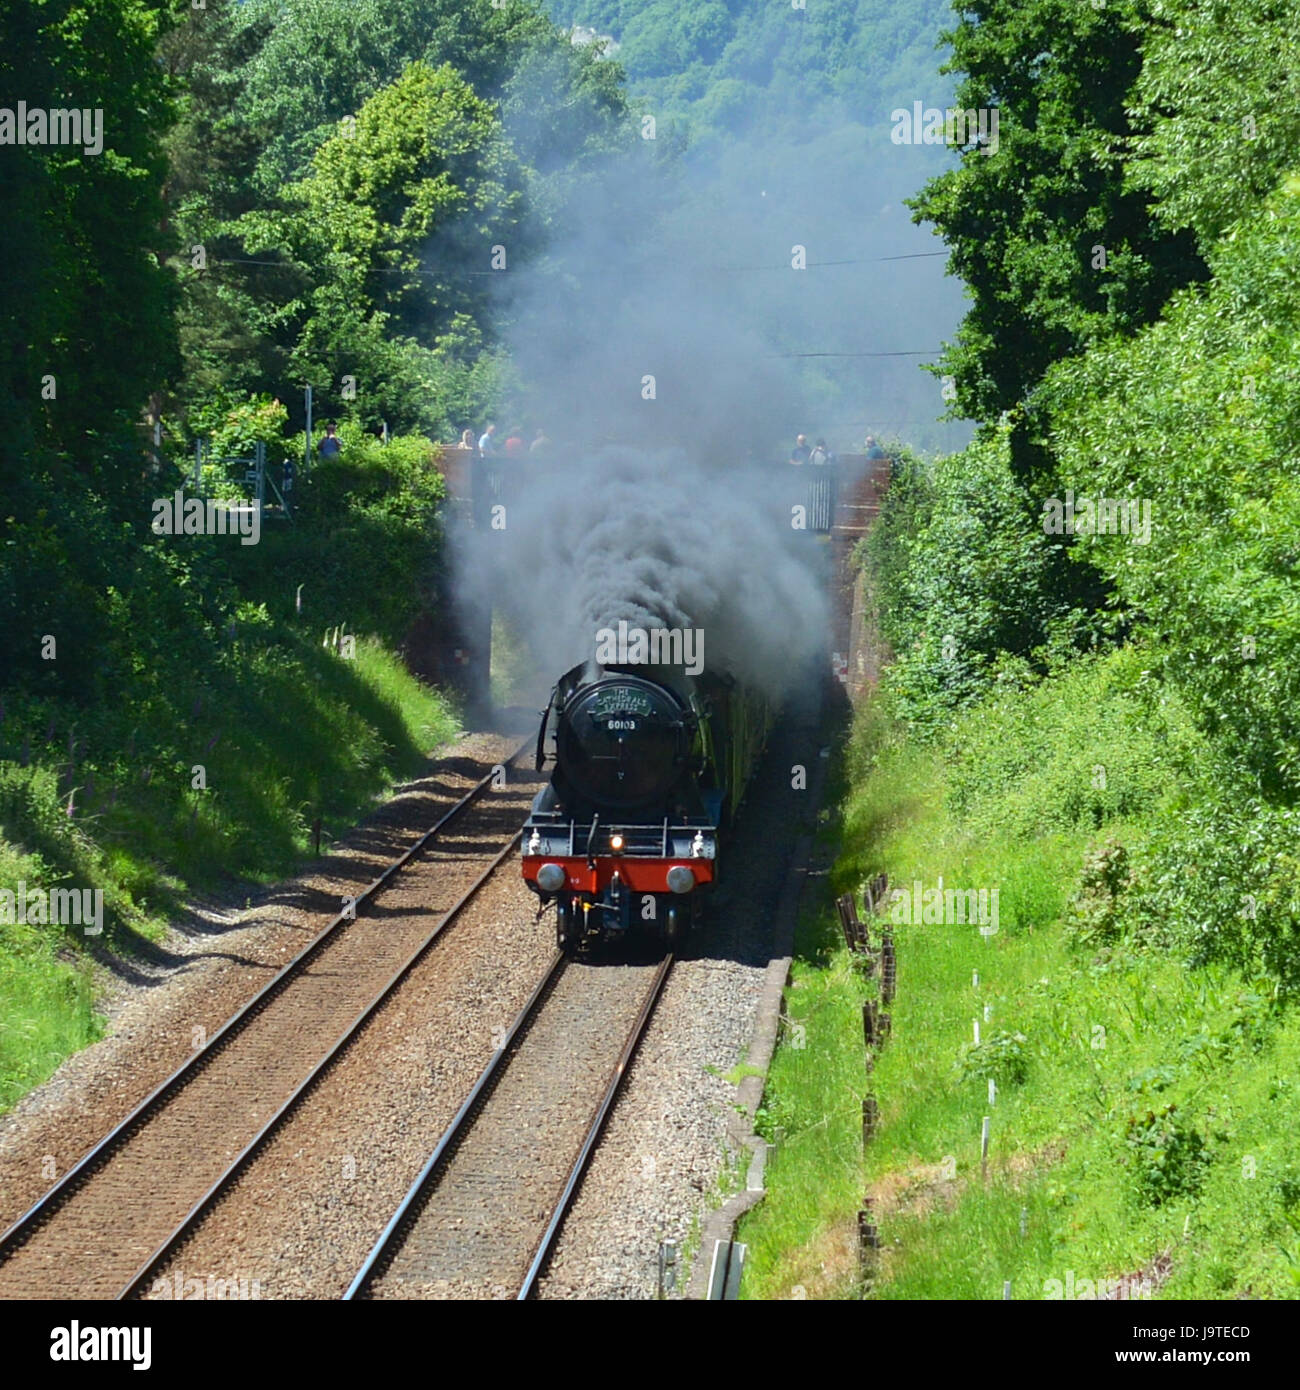 Reigate, Surrey, UK. 3rd June, 2017. Flying Scotsman 60103 Cathedrals Express Steam Locomotive hauling pullman coaches speeds through Reigate in Surrey. 1304hrs Saturday 3rd June 2017. Photo ©Lindsay Constable / Alamy Live News Stock Photo